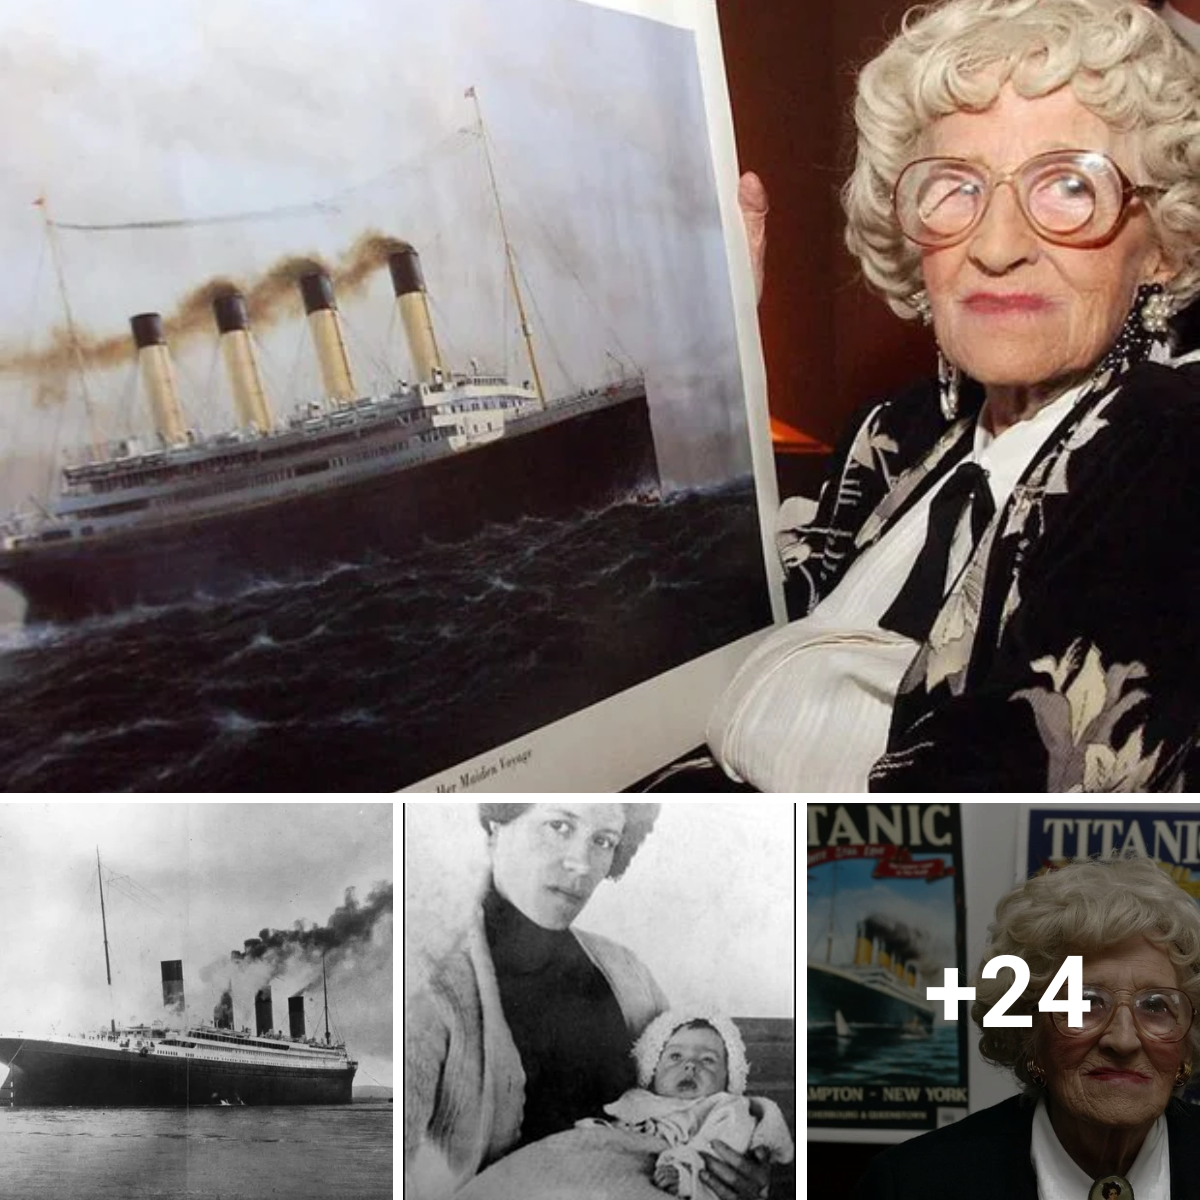 Tragic: The final Titanic survivor boarded the ship at the age of nine weeks and refused to watch movies due to upsetting recollections.